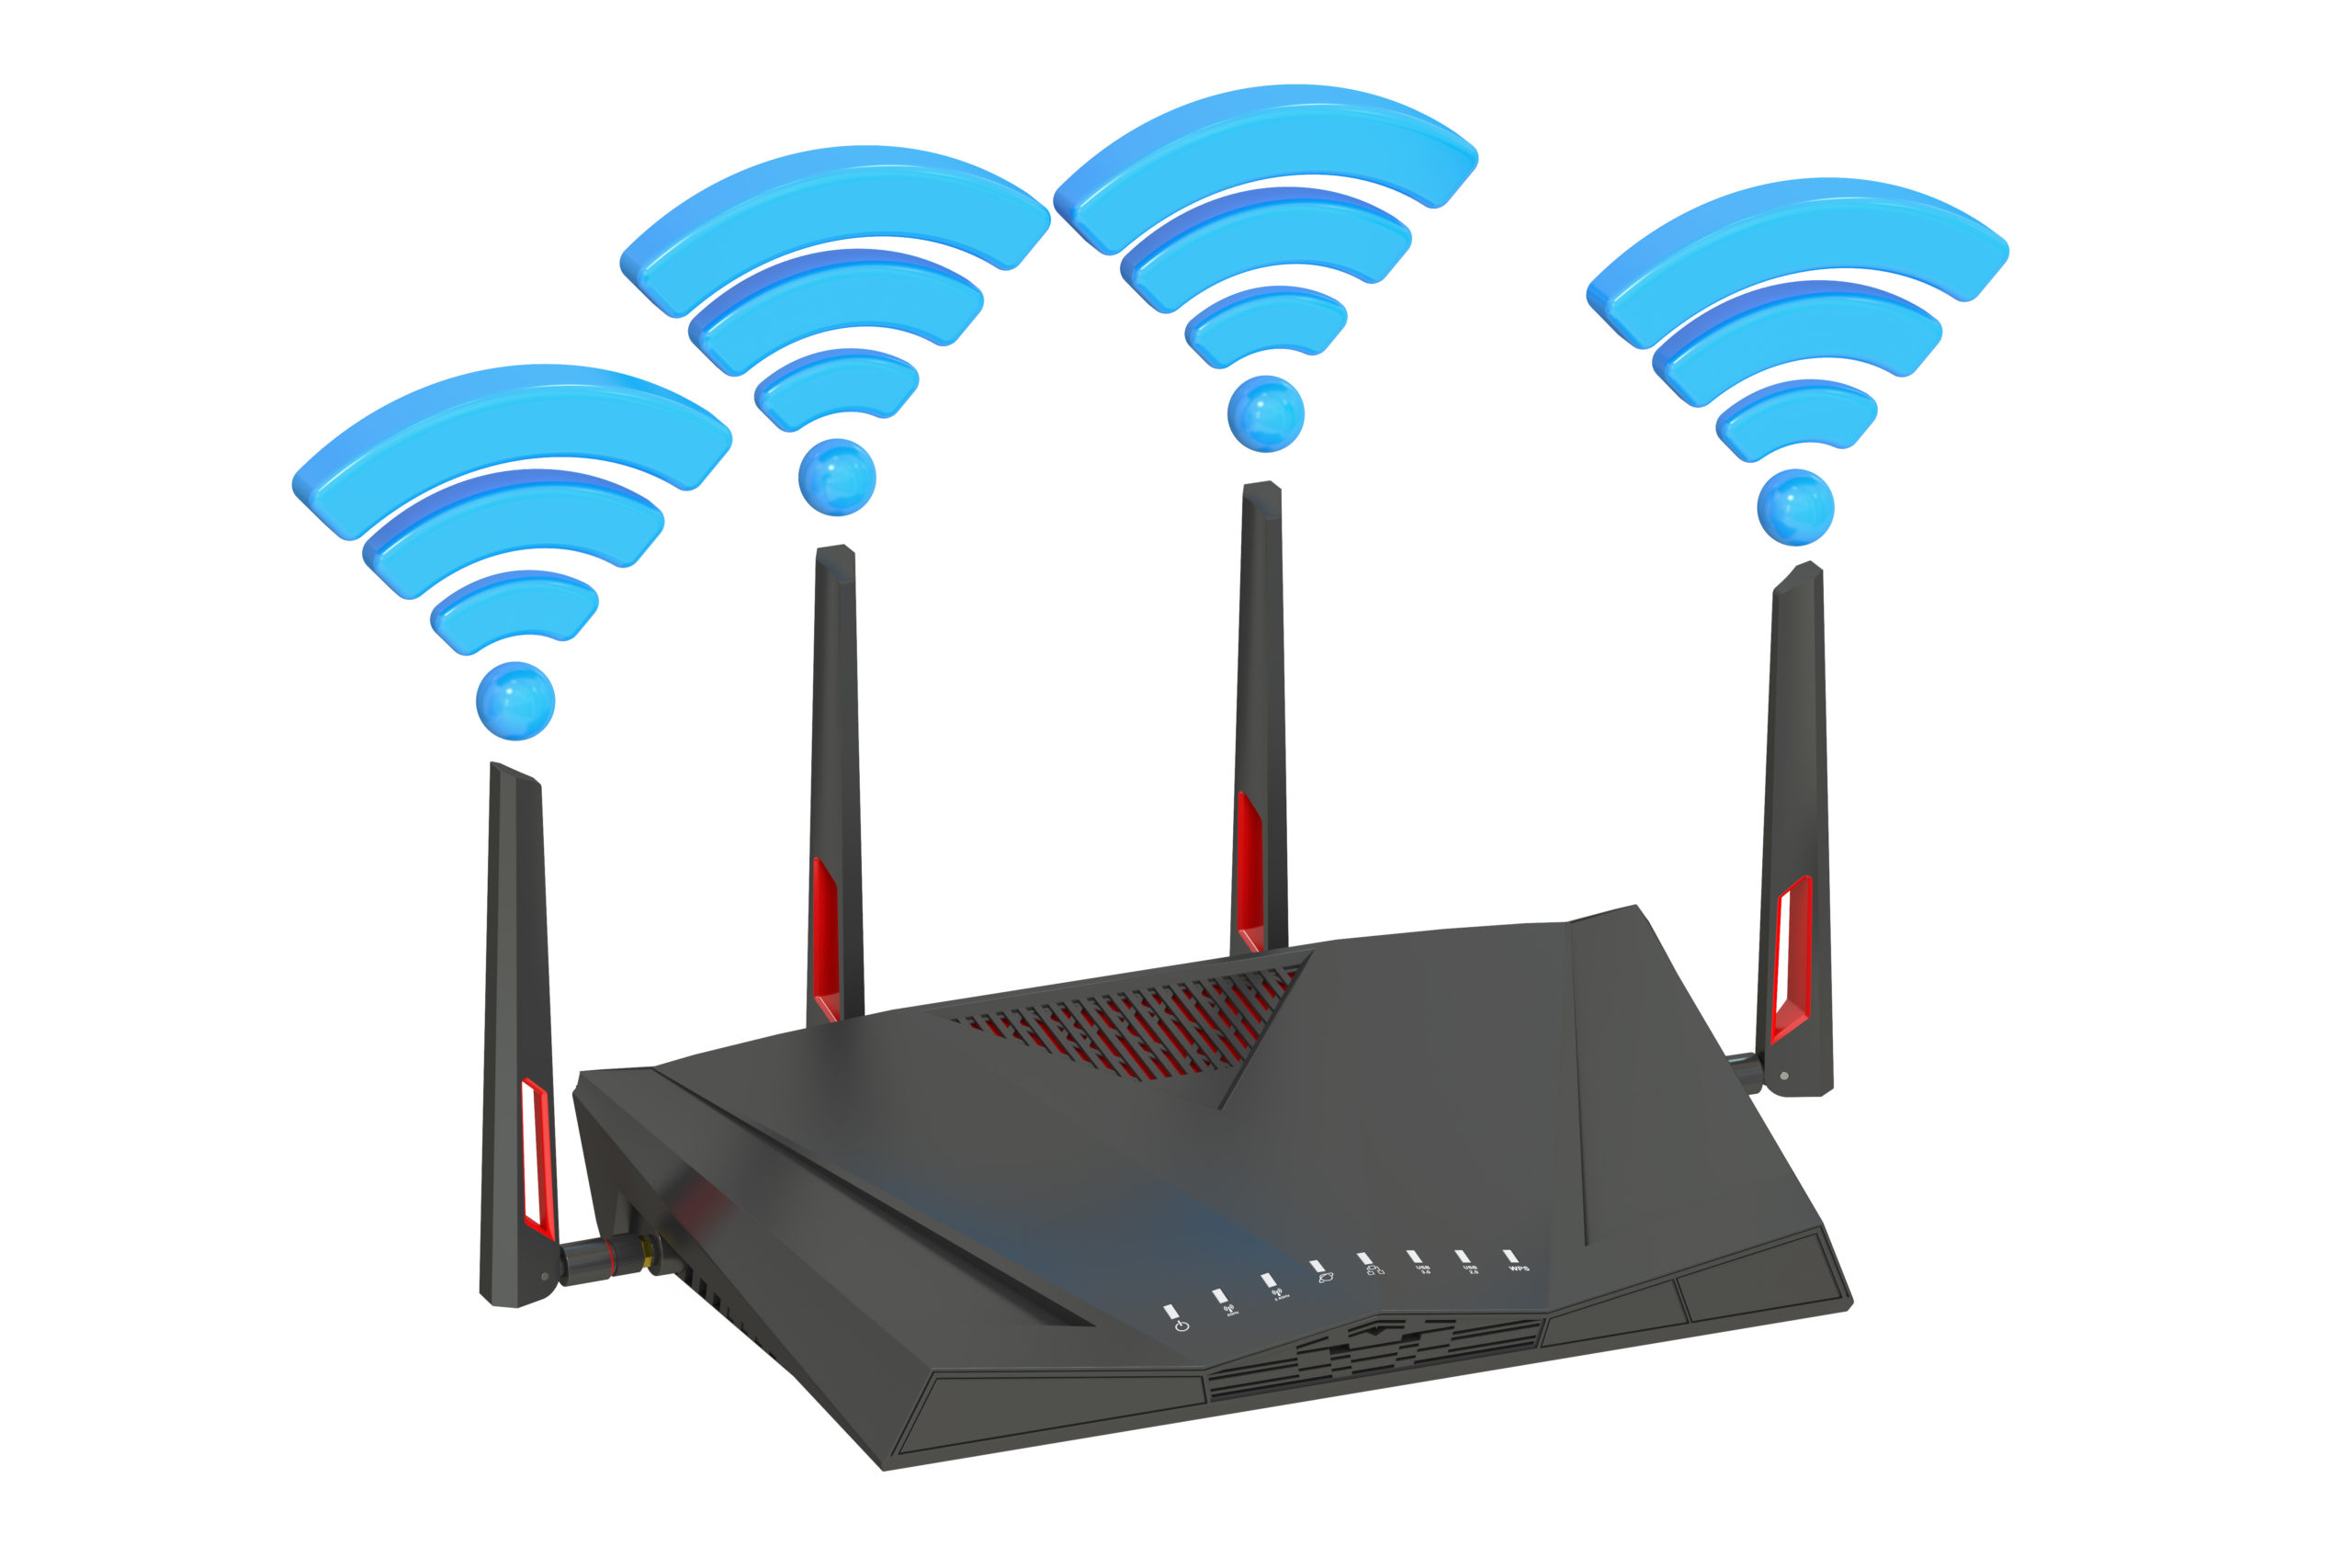 What is my Network Connection… 2.4ghz or 5ghz